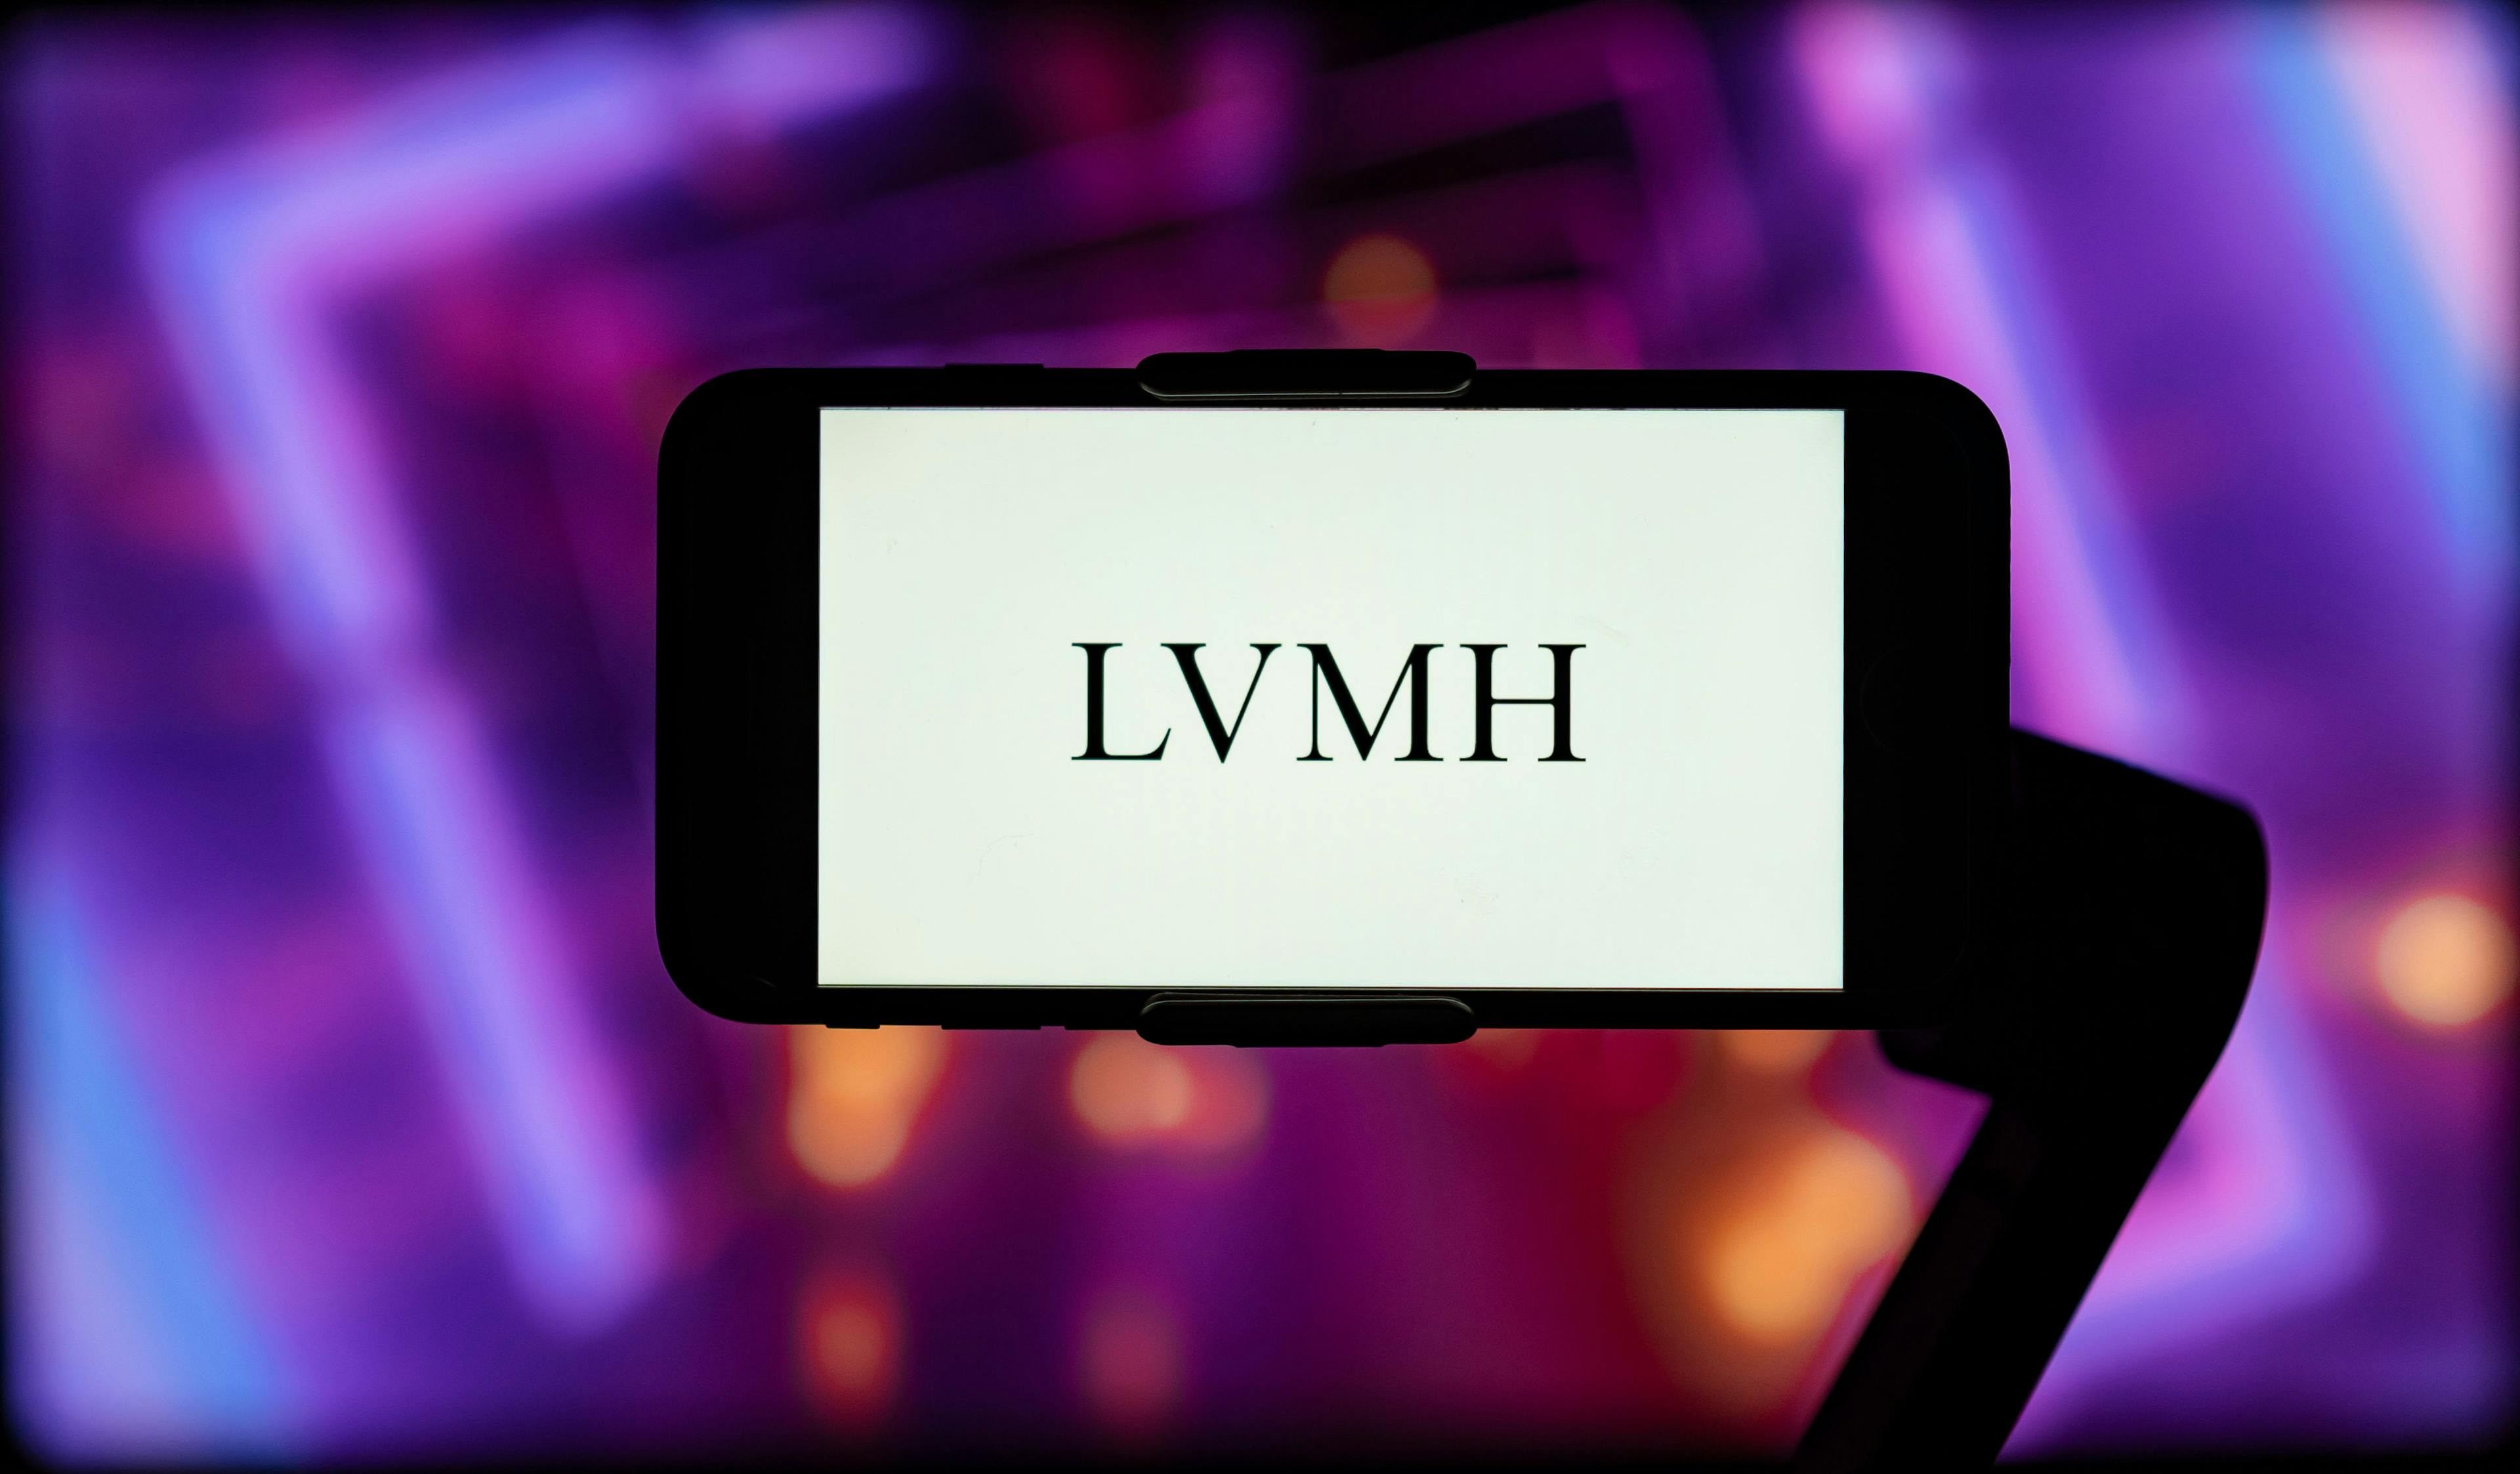 The logo of LVMH on a smartphone.